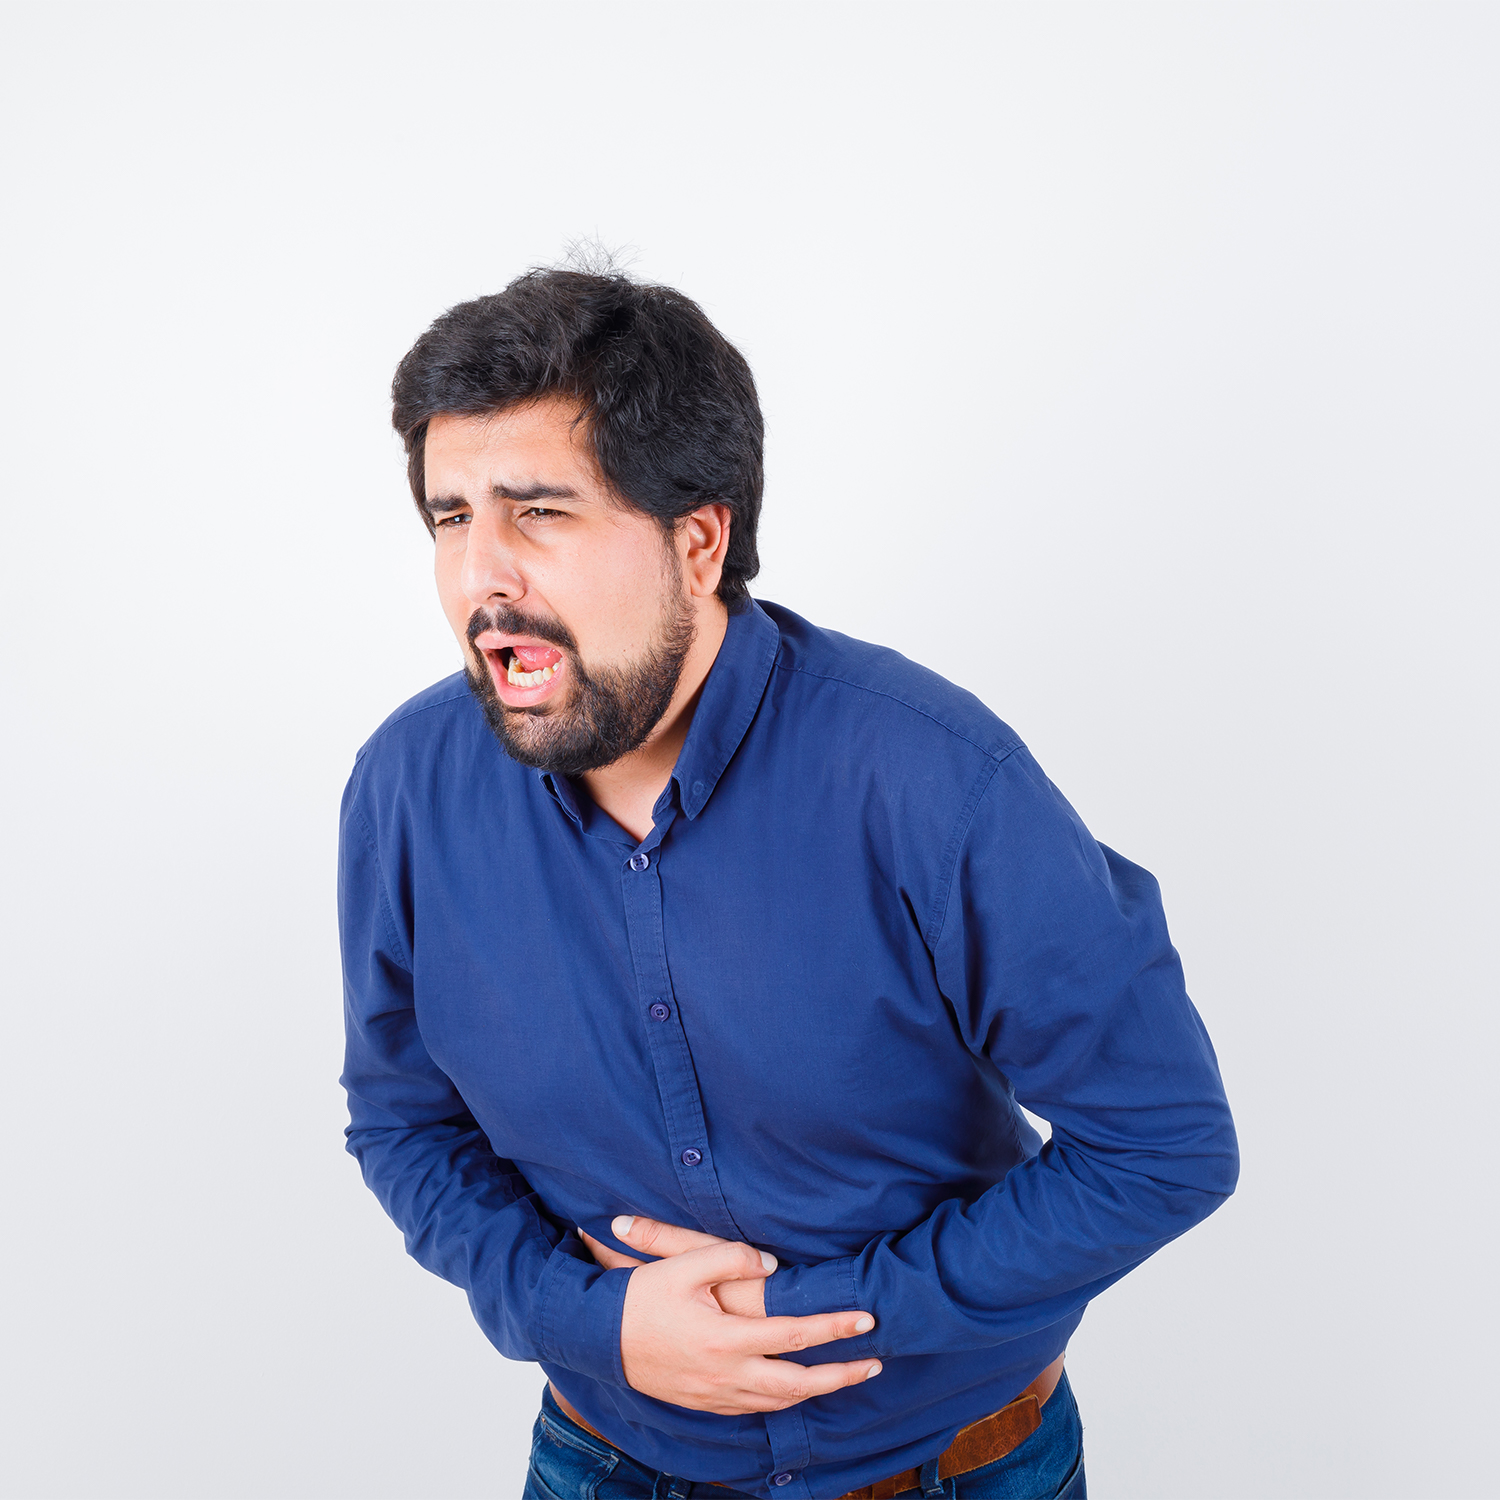 7 Natural Remedies to Overcome Gallbladder Pain